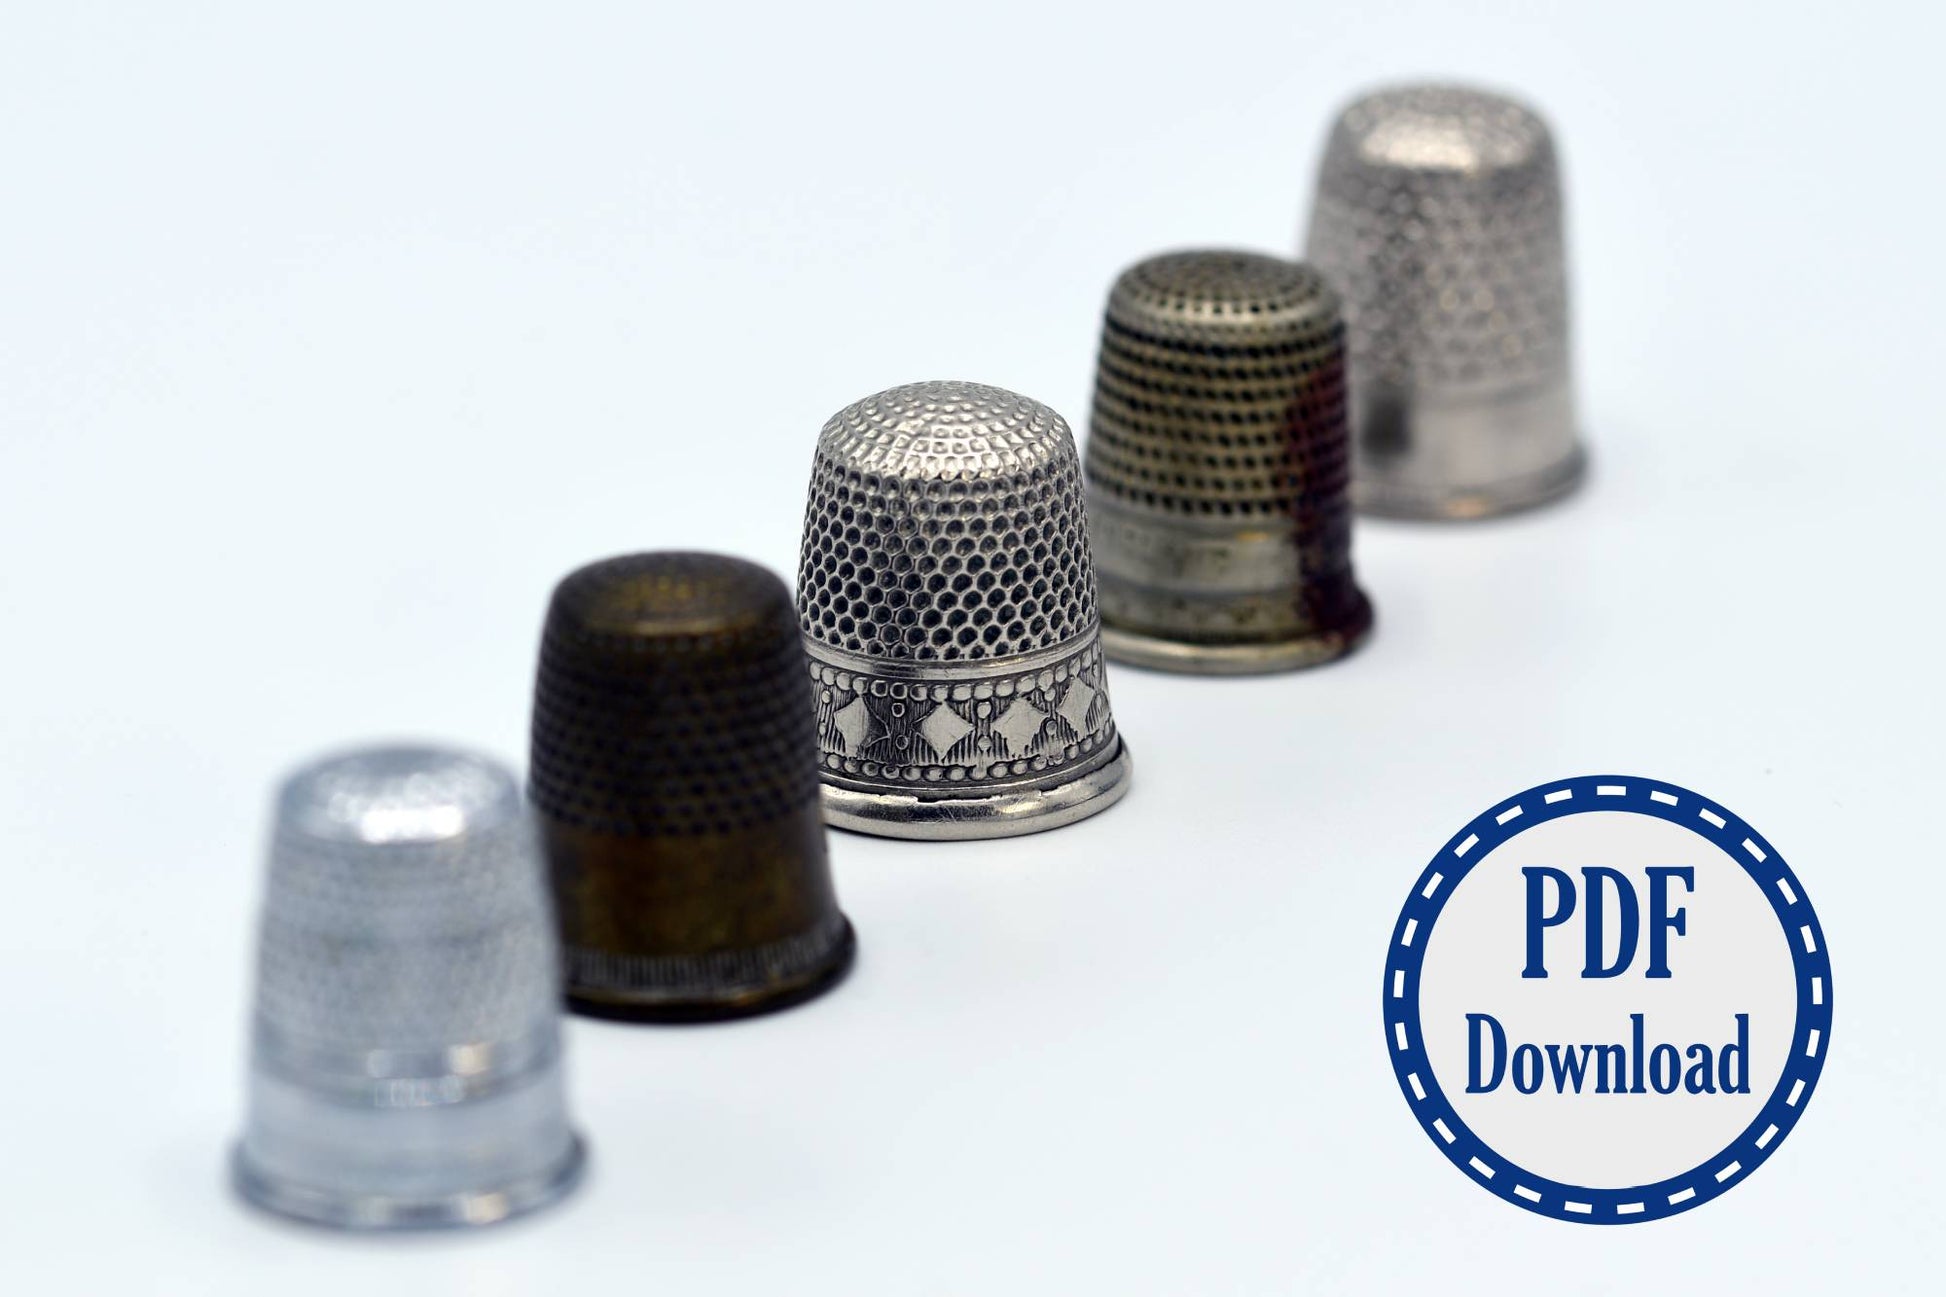 Line of antique thimbles in various sizes and patterns